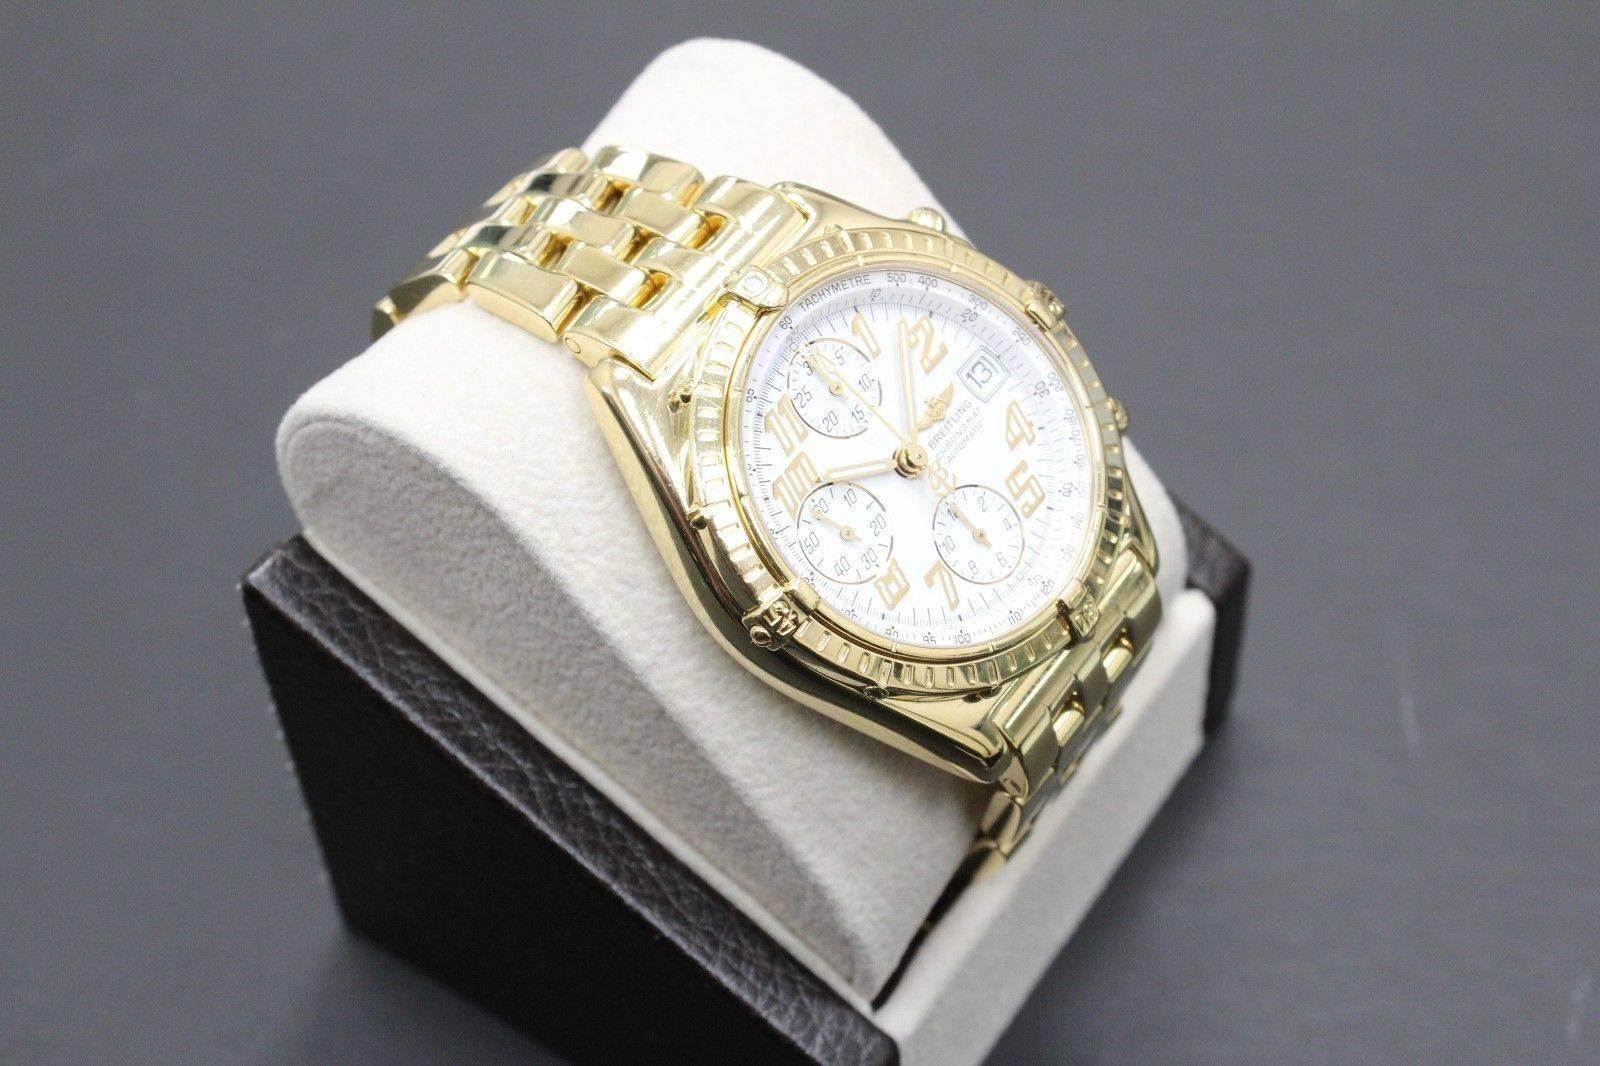 Style Number: K13050.1
Model: Chronomat 
Case Material: 18K Yellow Gold
Band: 18K Yellow Gold
Bezel: 18K Yellow Gold
Dial: White
Face: Sapphire Crystal 
Case Size: 40mm
Includes: 
-Elegant Watch Box
-Certified Appraisal 
-1 Year Warranty

Retail: